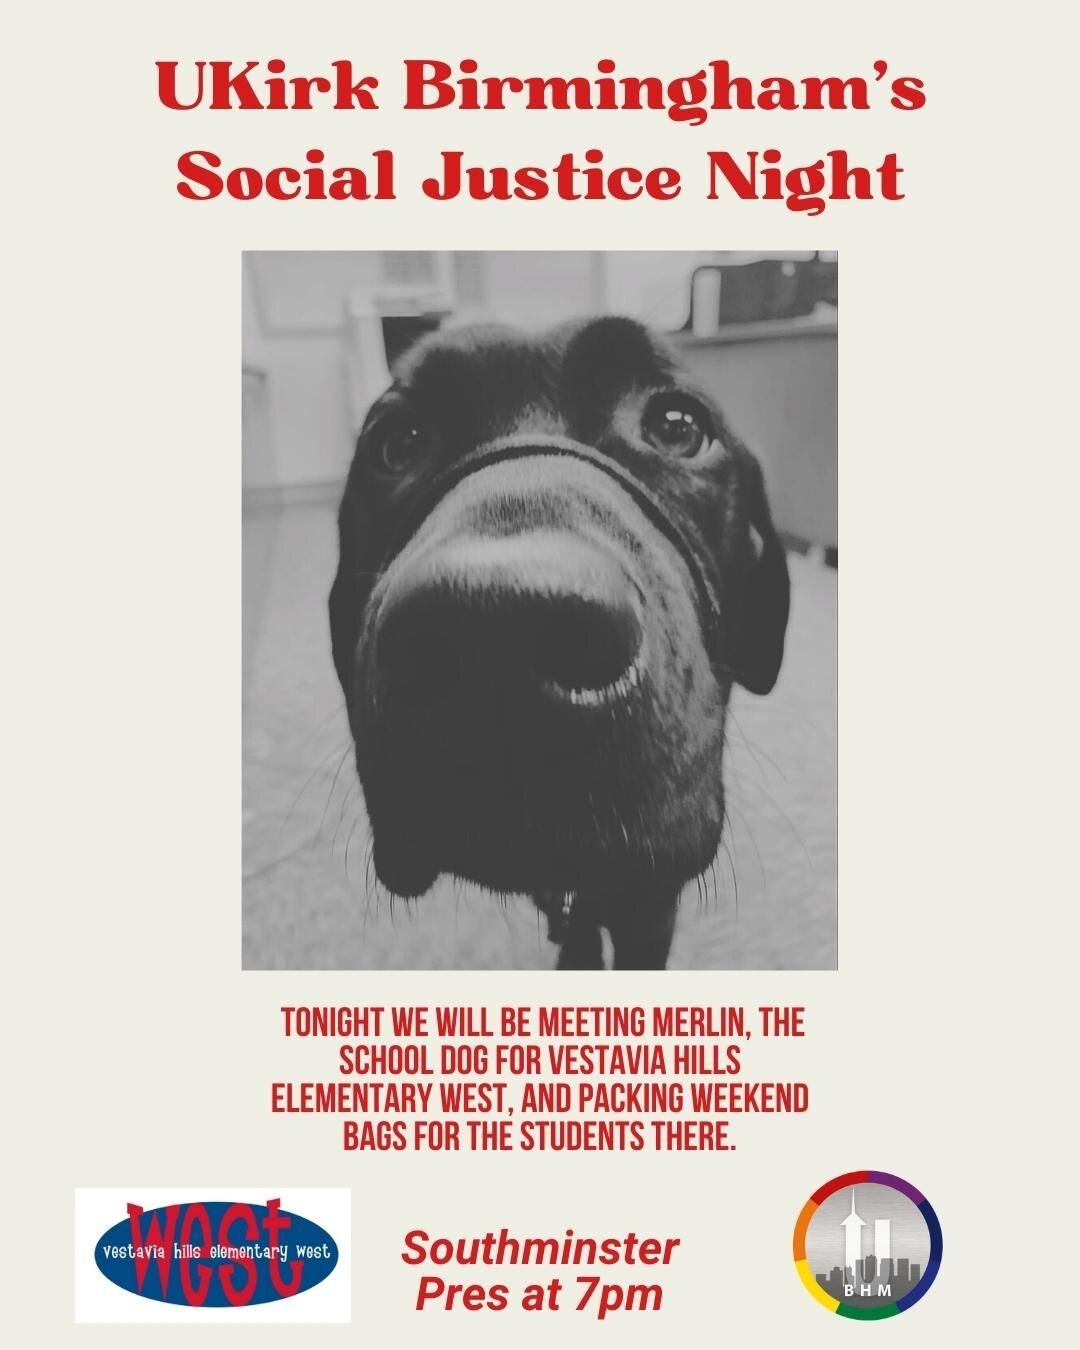 Tonight's UKirk Thursday is Social Justice night and we will be meeting at Southminster Presbyterian Church at 7pm to meet Merlin, the school dog from Vestavia Hills Elementary West. Then we will packing weekend food bags for the students. Followed b